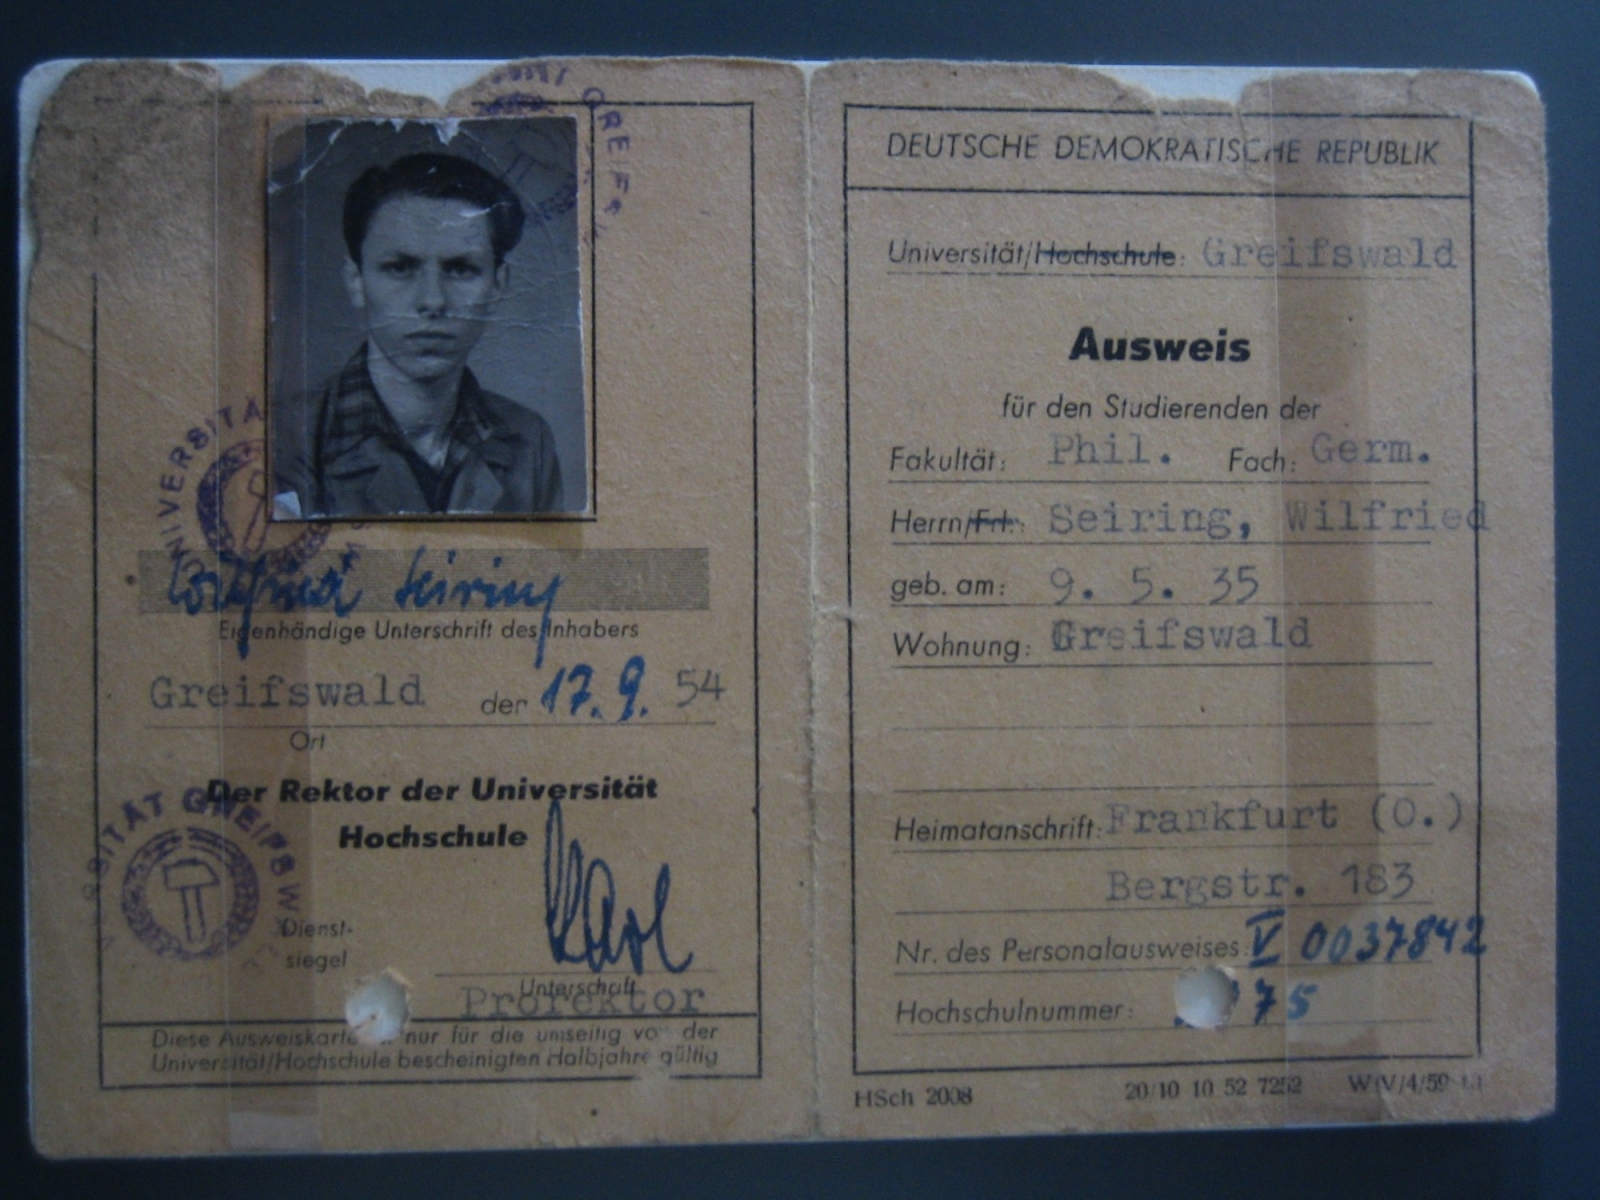 Wilfried Seiring's student card